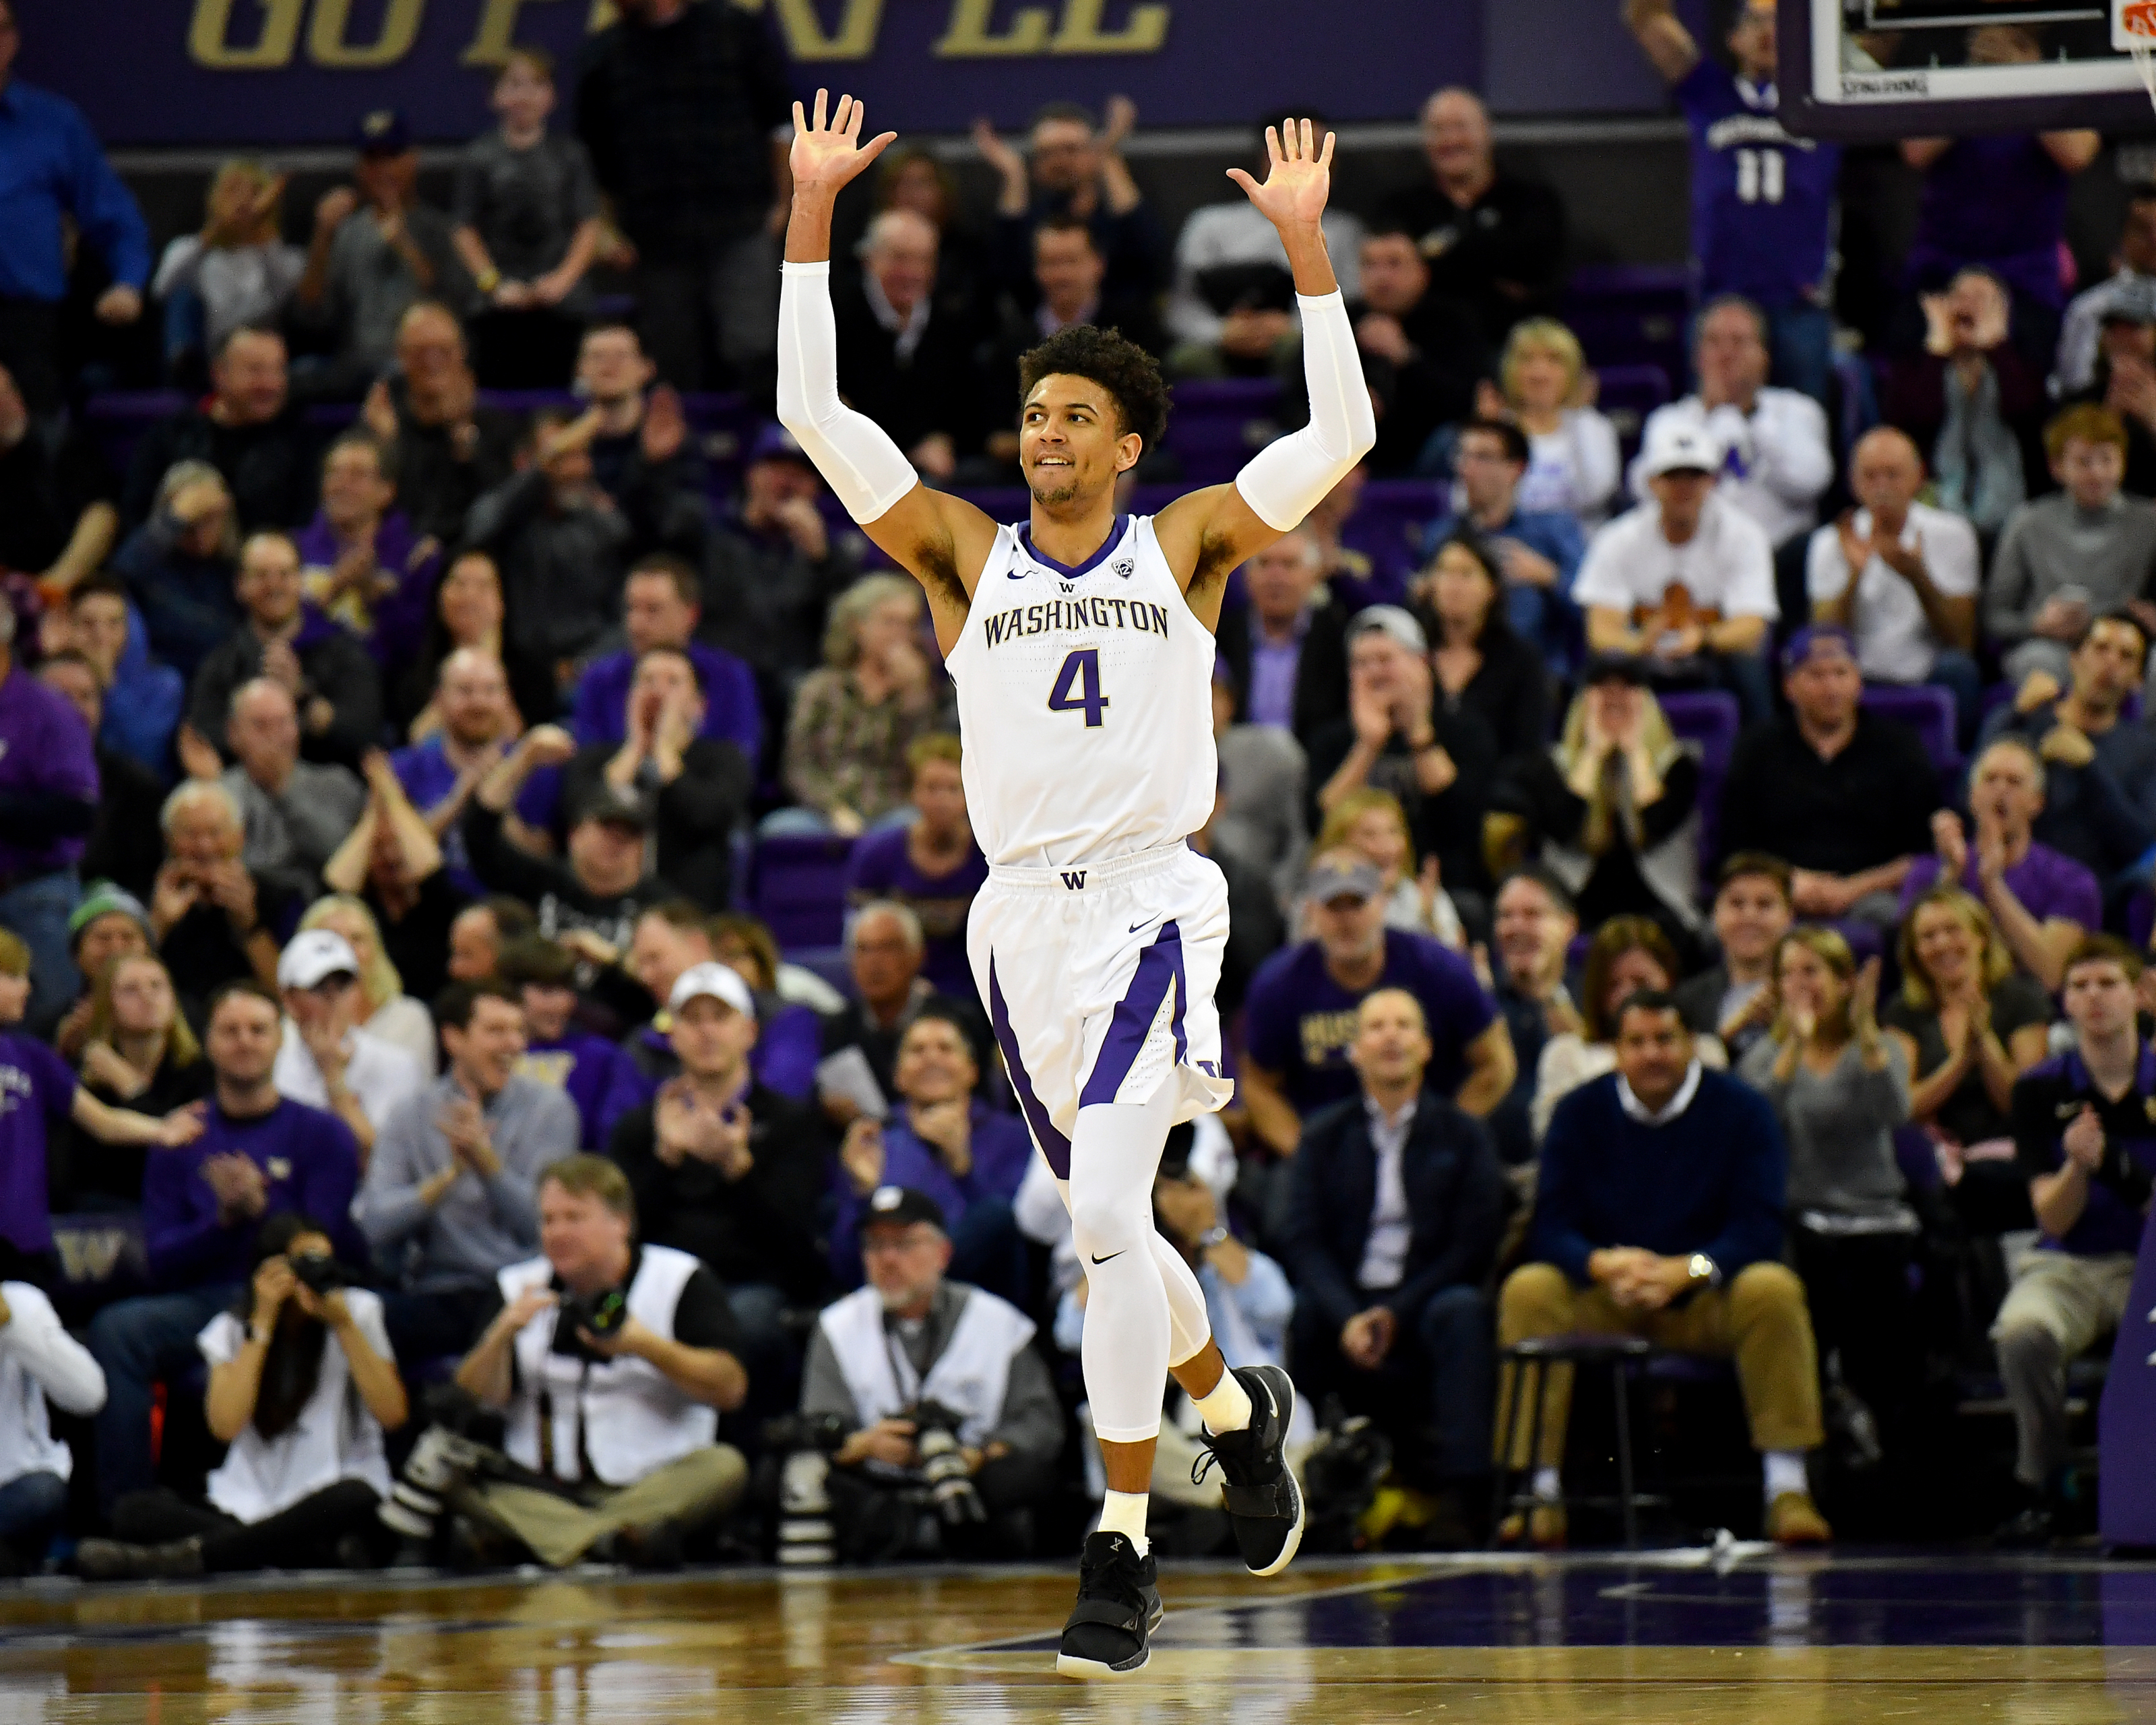 Washington's Matisse Thybulle is college basketball's 'angel of